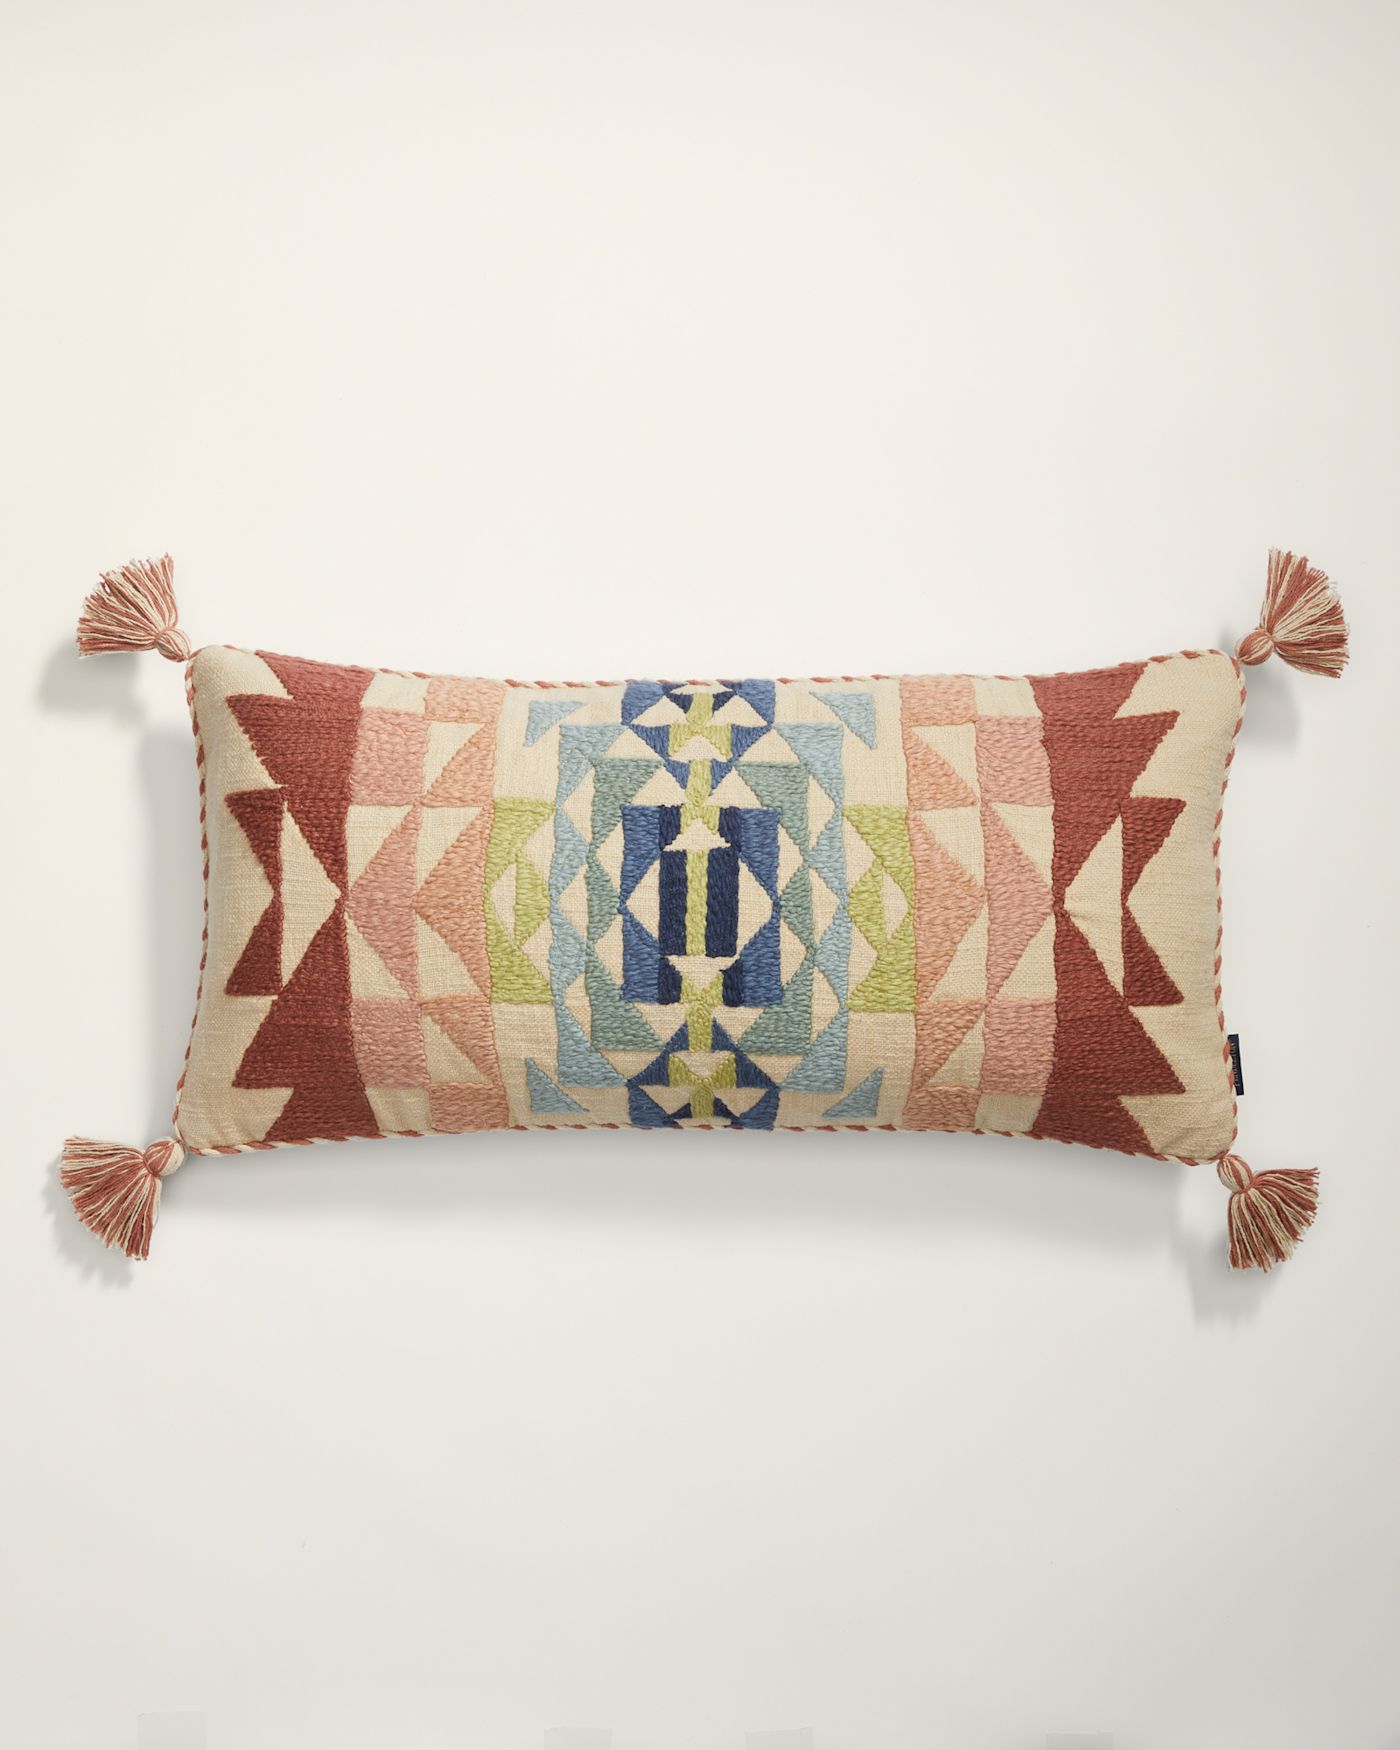 OPAL SPRINGS EMBROIDERED HUG PILLOW